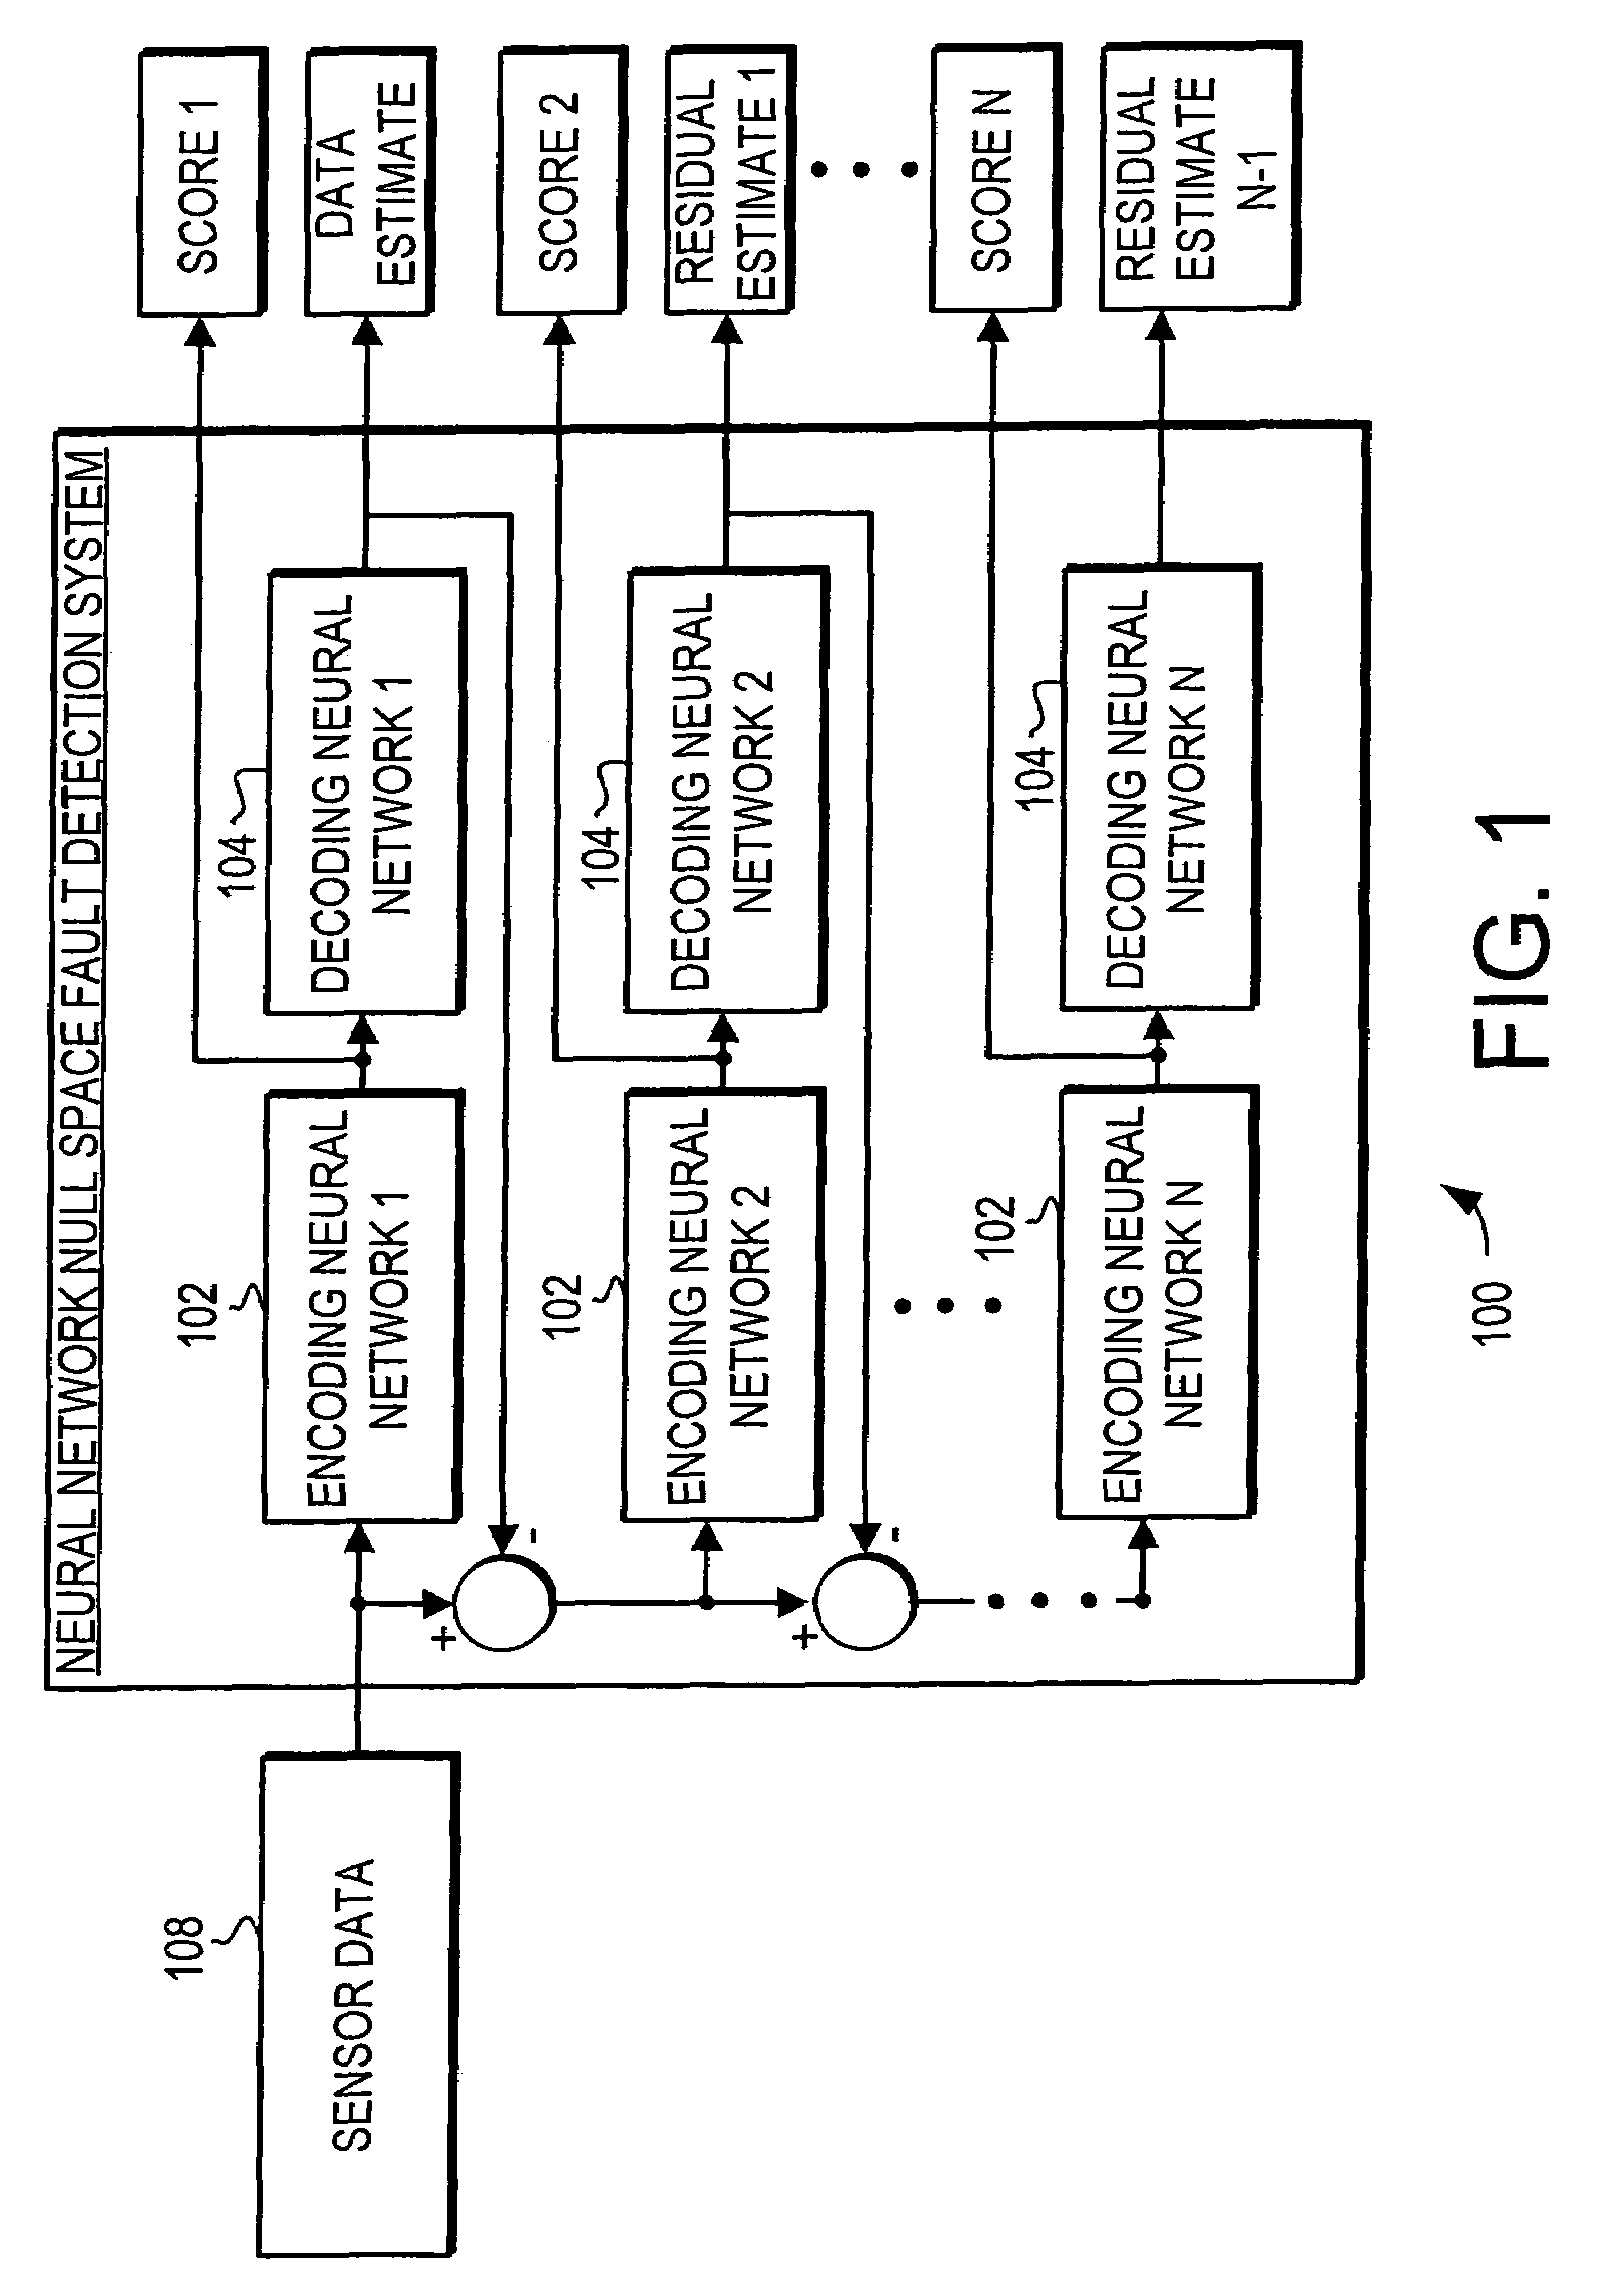 Fault detection system and method using approximate null space base fault signature classification